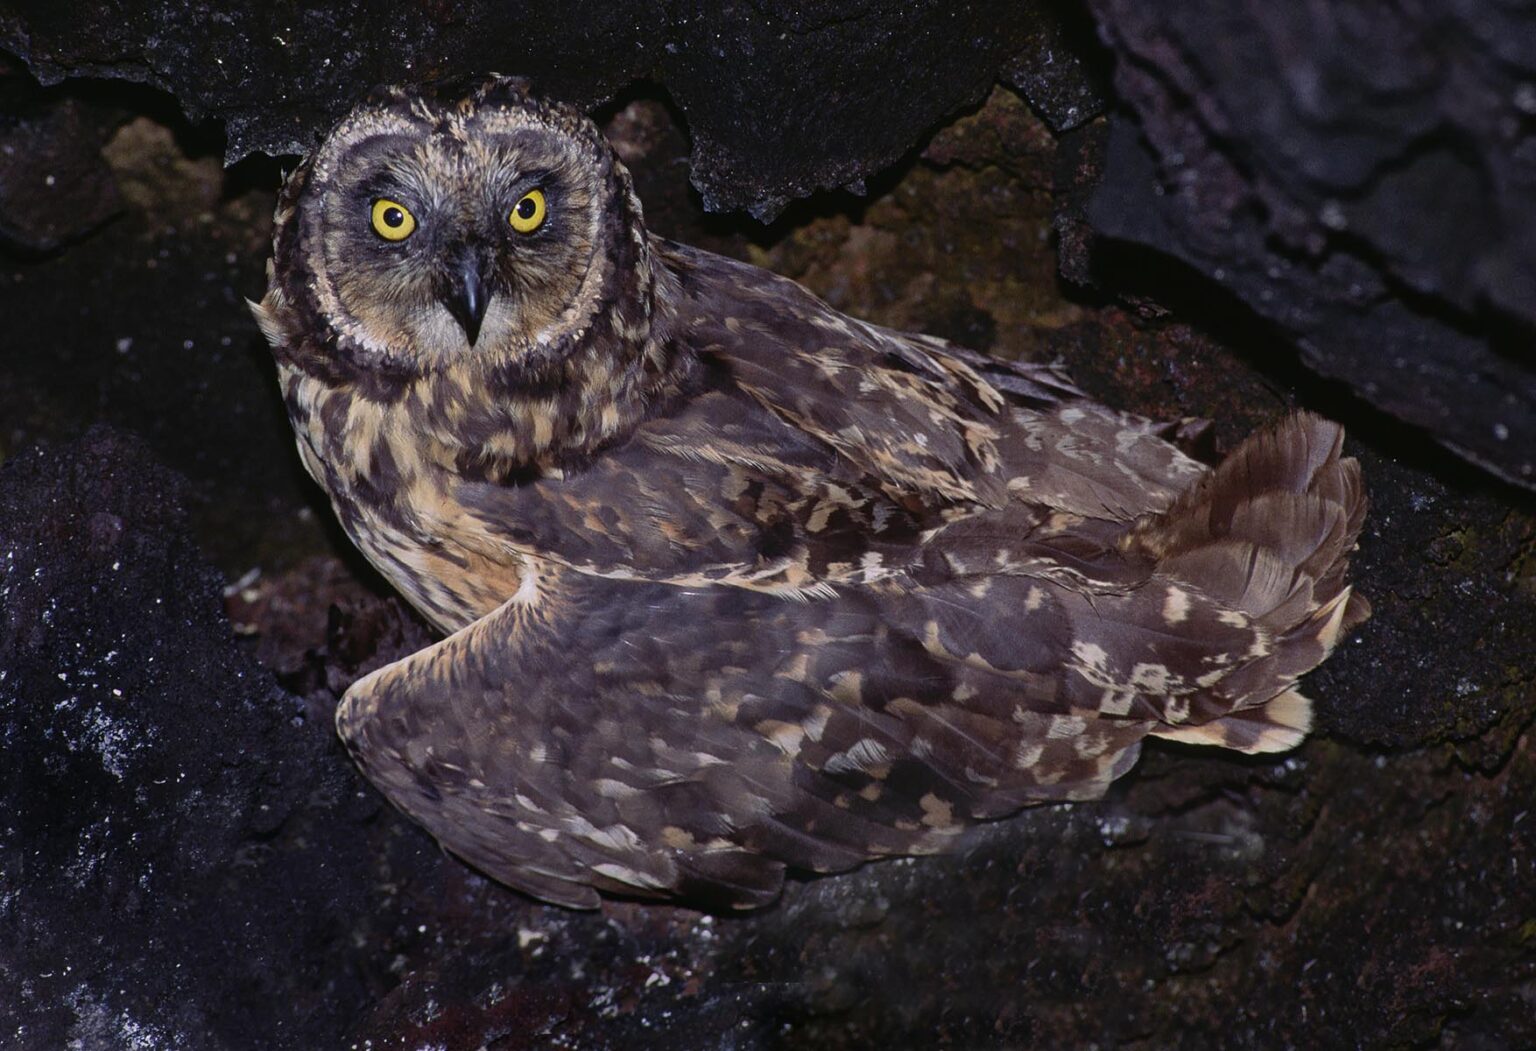 The SHORT-EARED OWL (Asio flammeus), one of the islands only natural predators - TOWER ISLAND, GALAPAGOS ISLANDS, ECUADOR